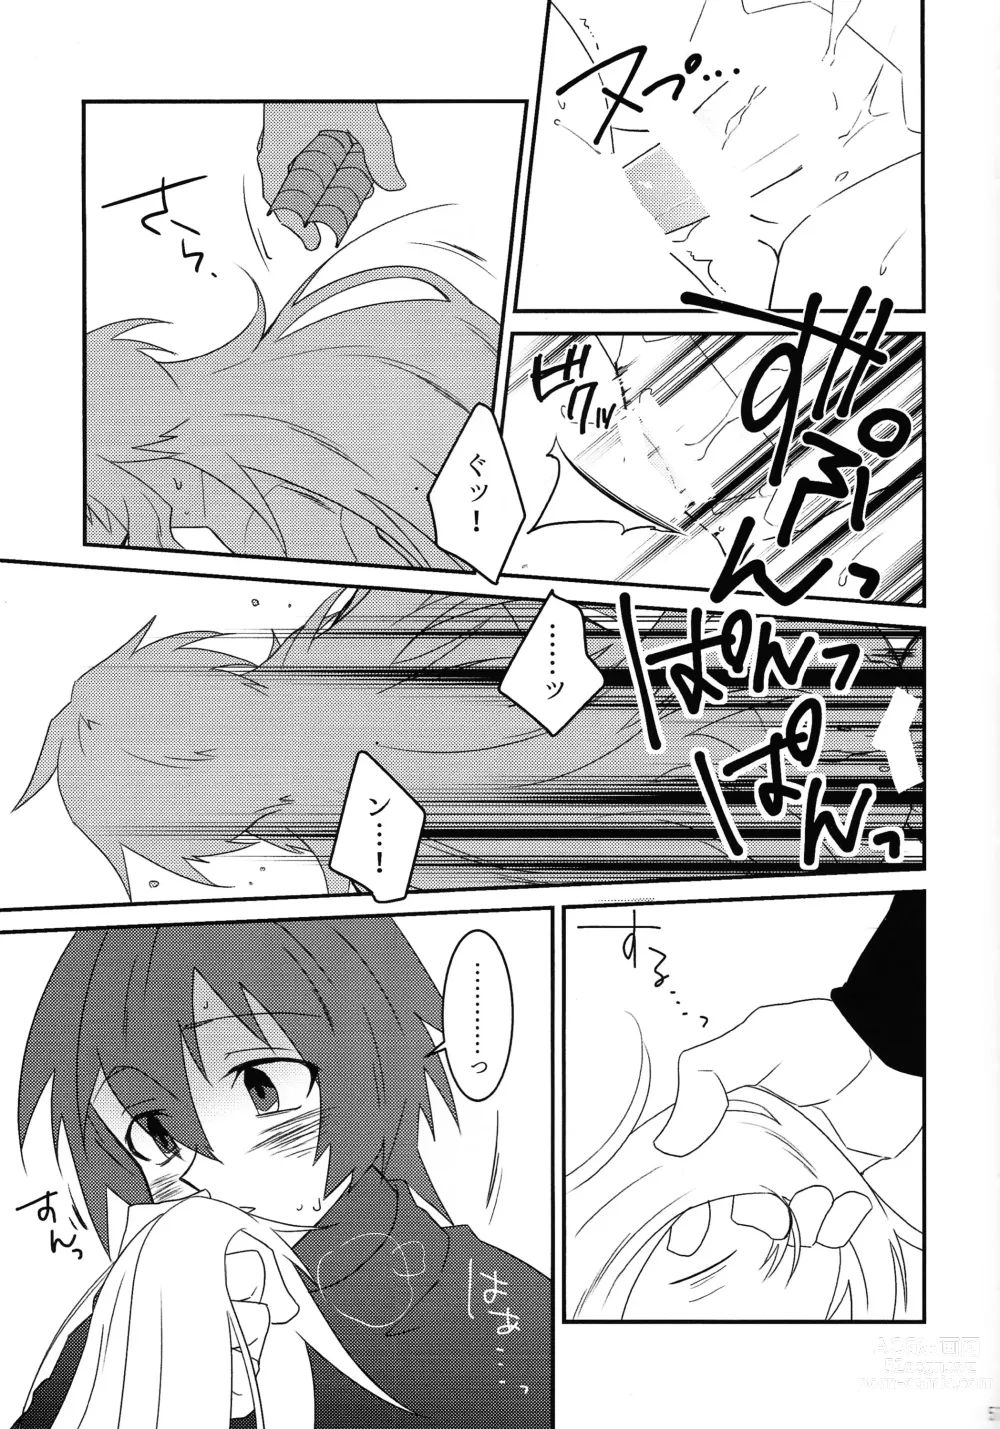 Page 56 of doujinshi KNIFE IN THE SWEET SUGAR